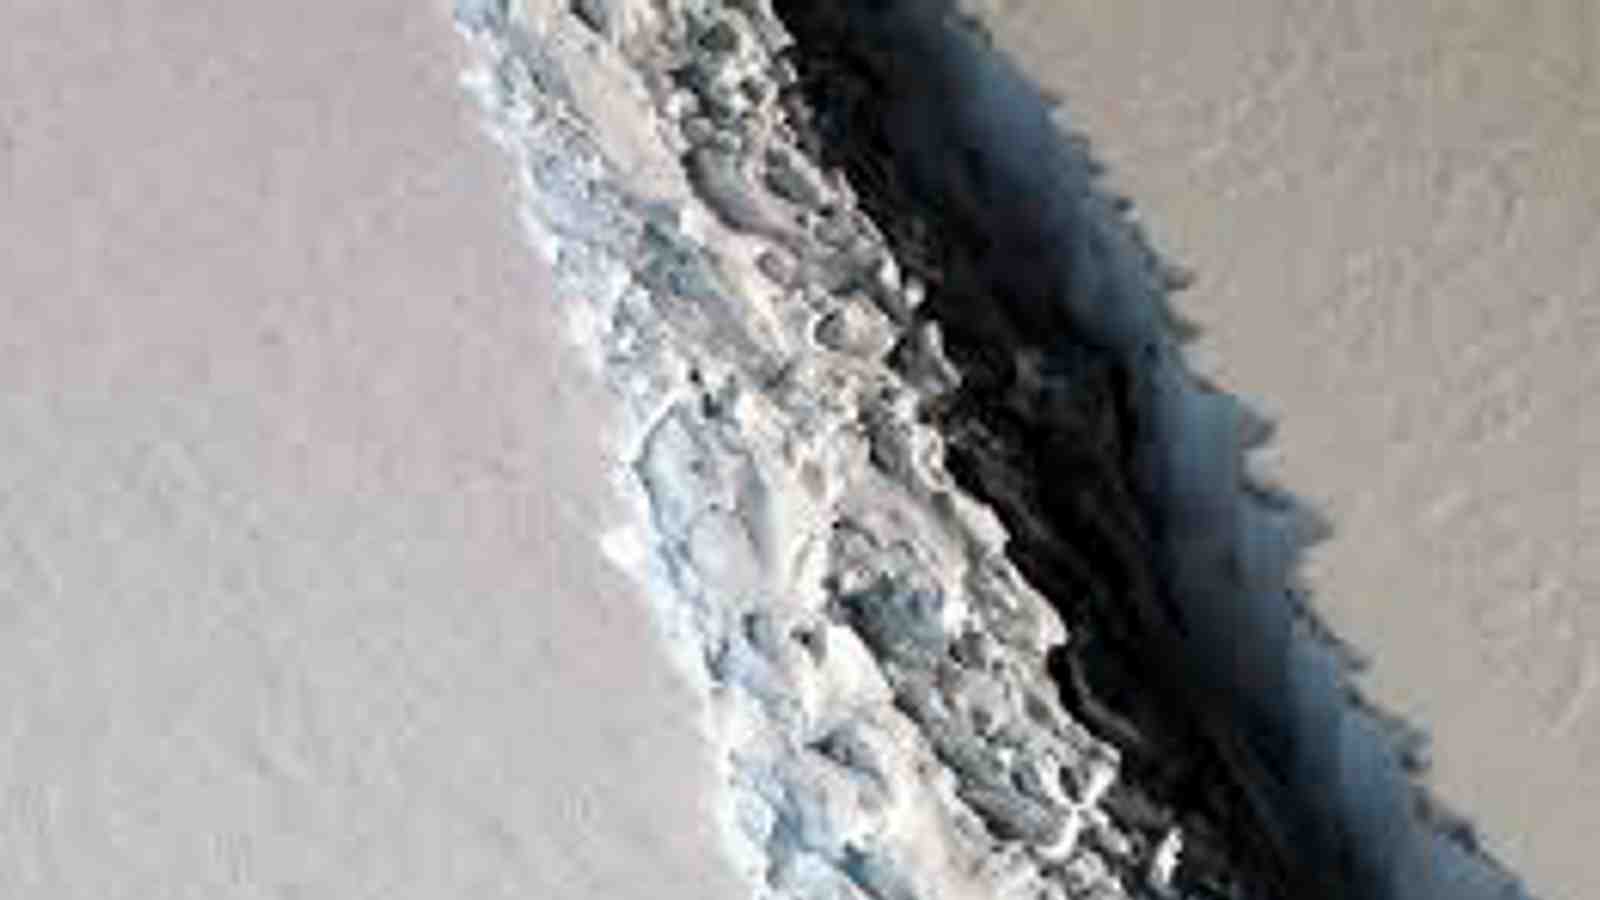 A crack forming in an ice shelf.